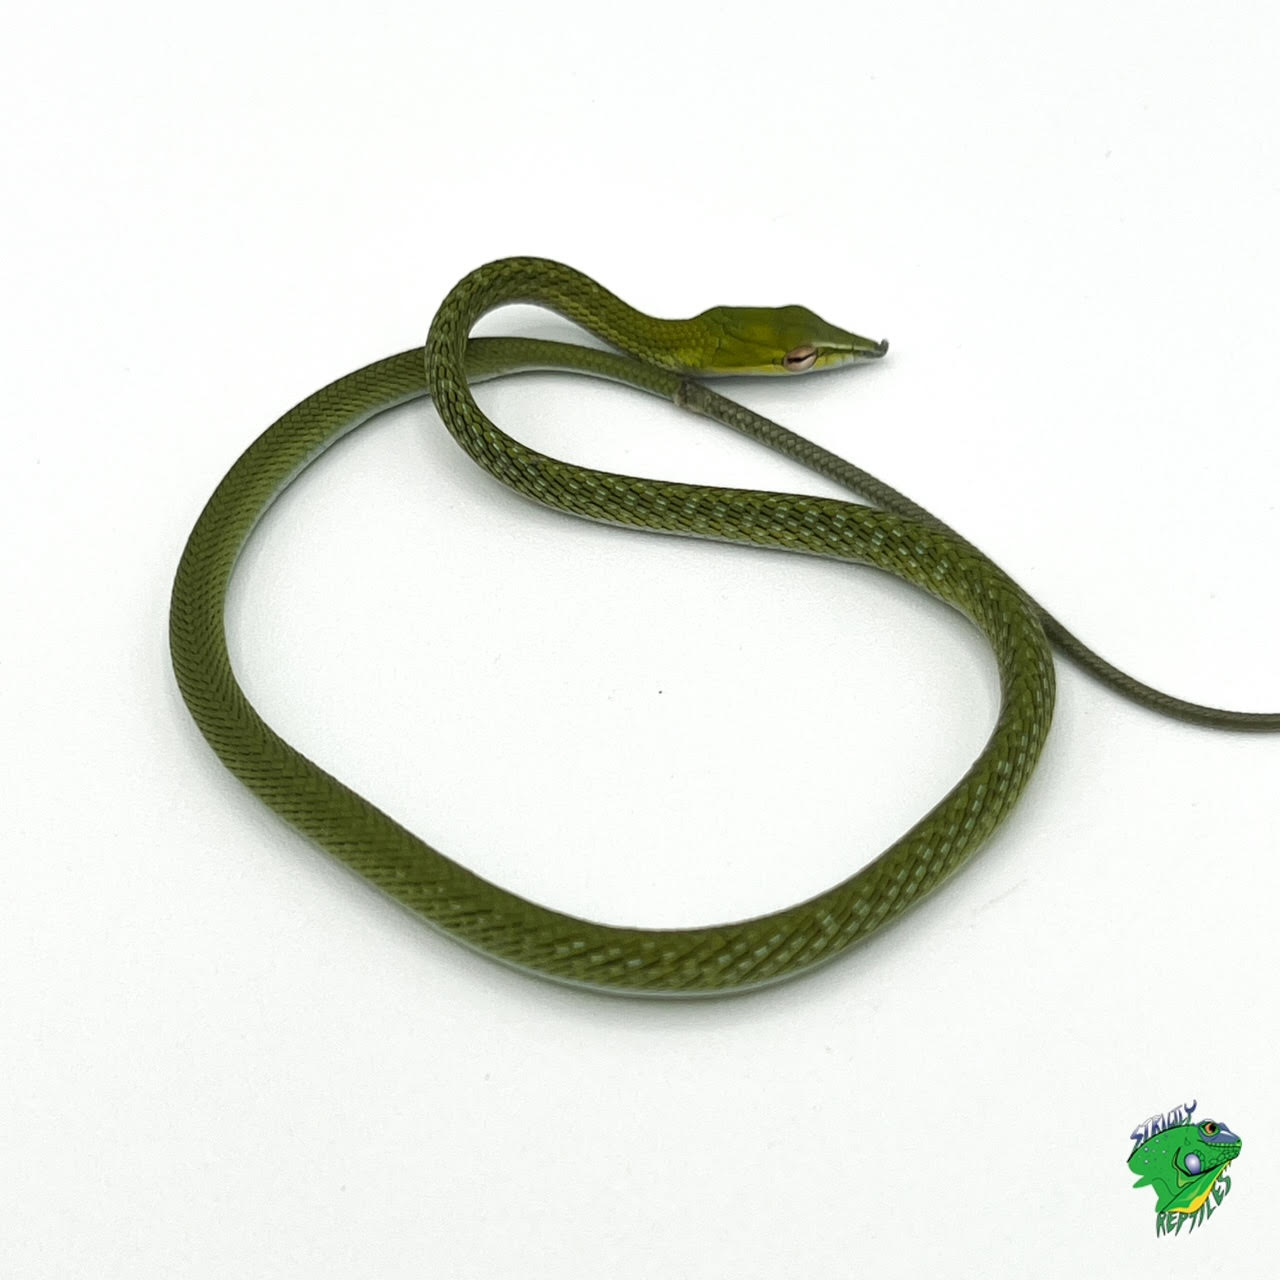 Asian Vine Snake - cb baby SPECIAL - Strictly Reptiles